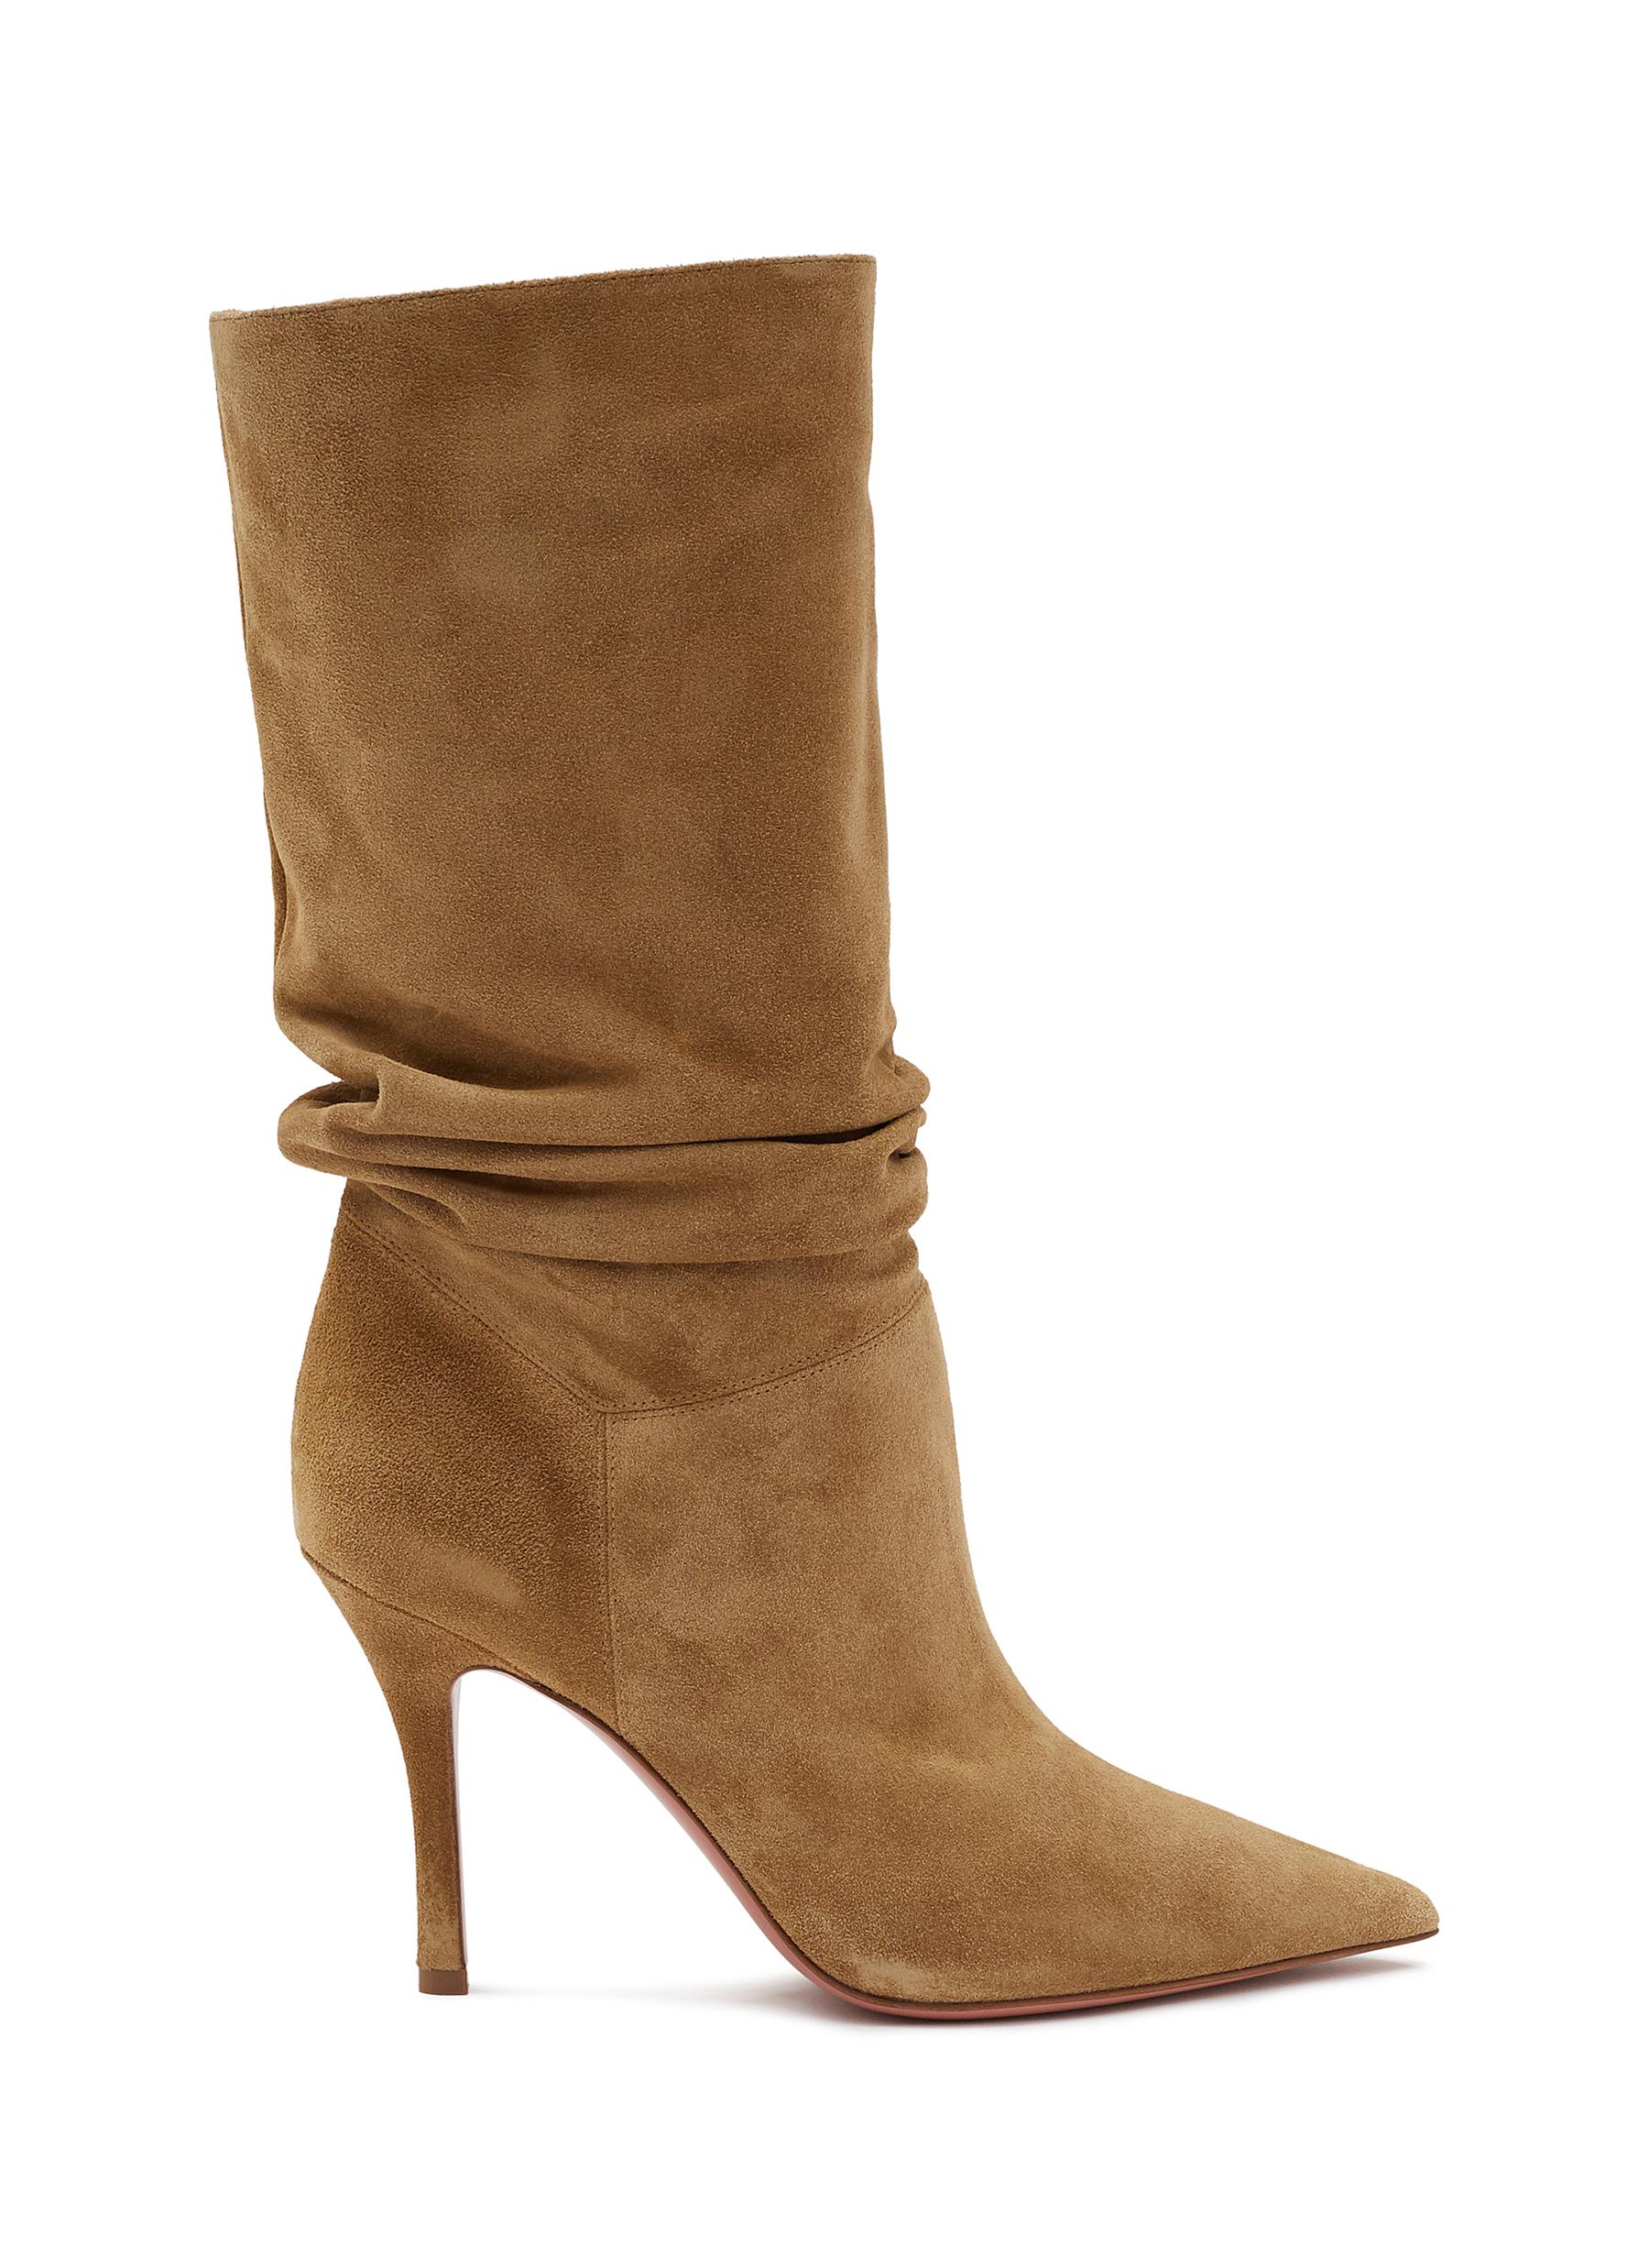 'Ida' 95 Point Toe Slouchy Suede Heeled Boots